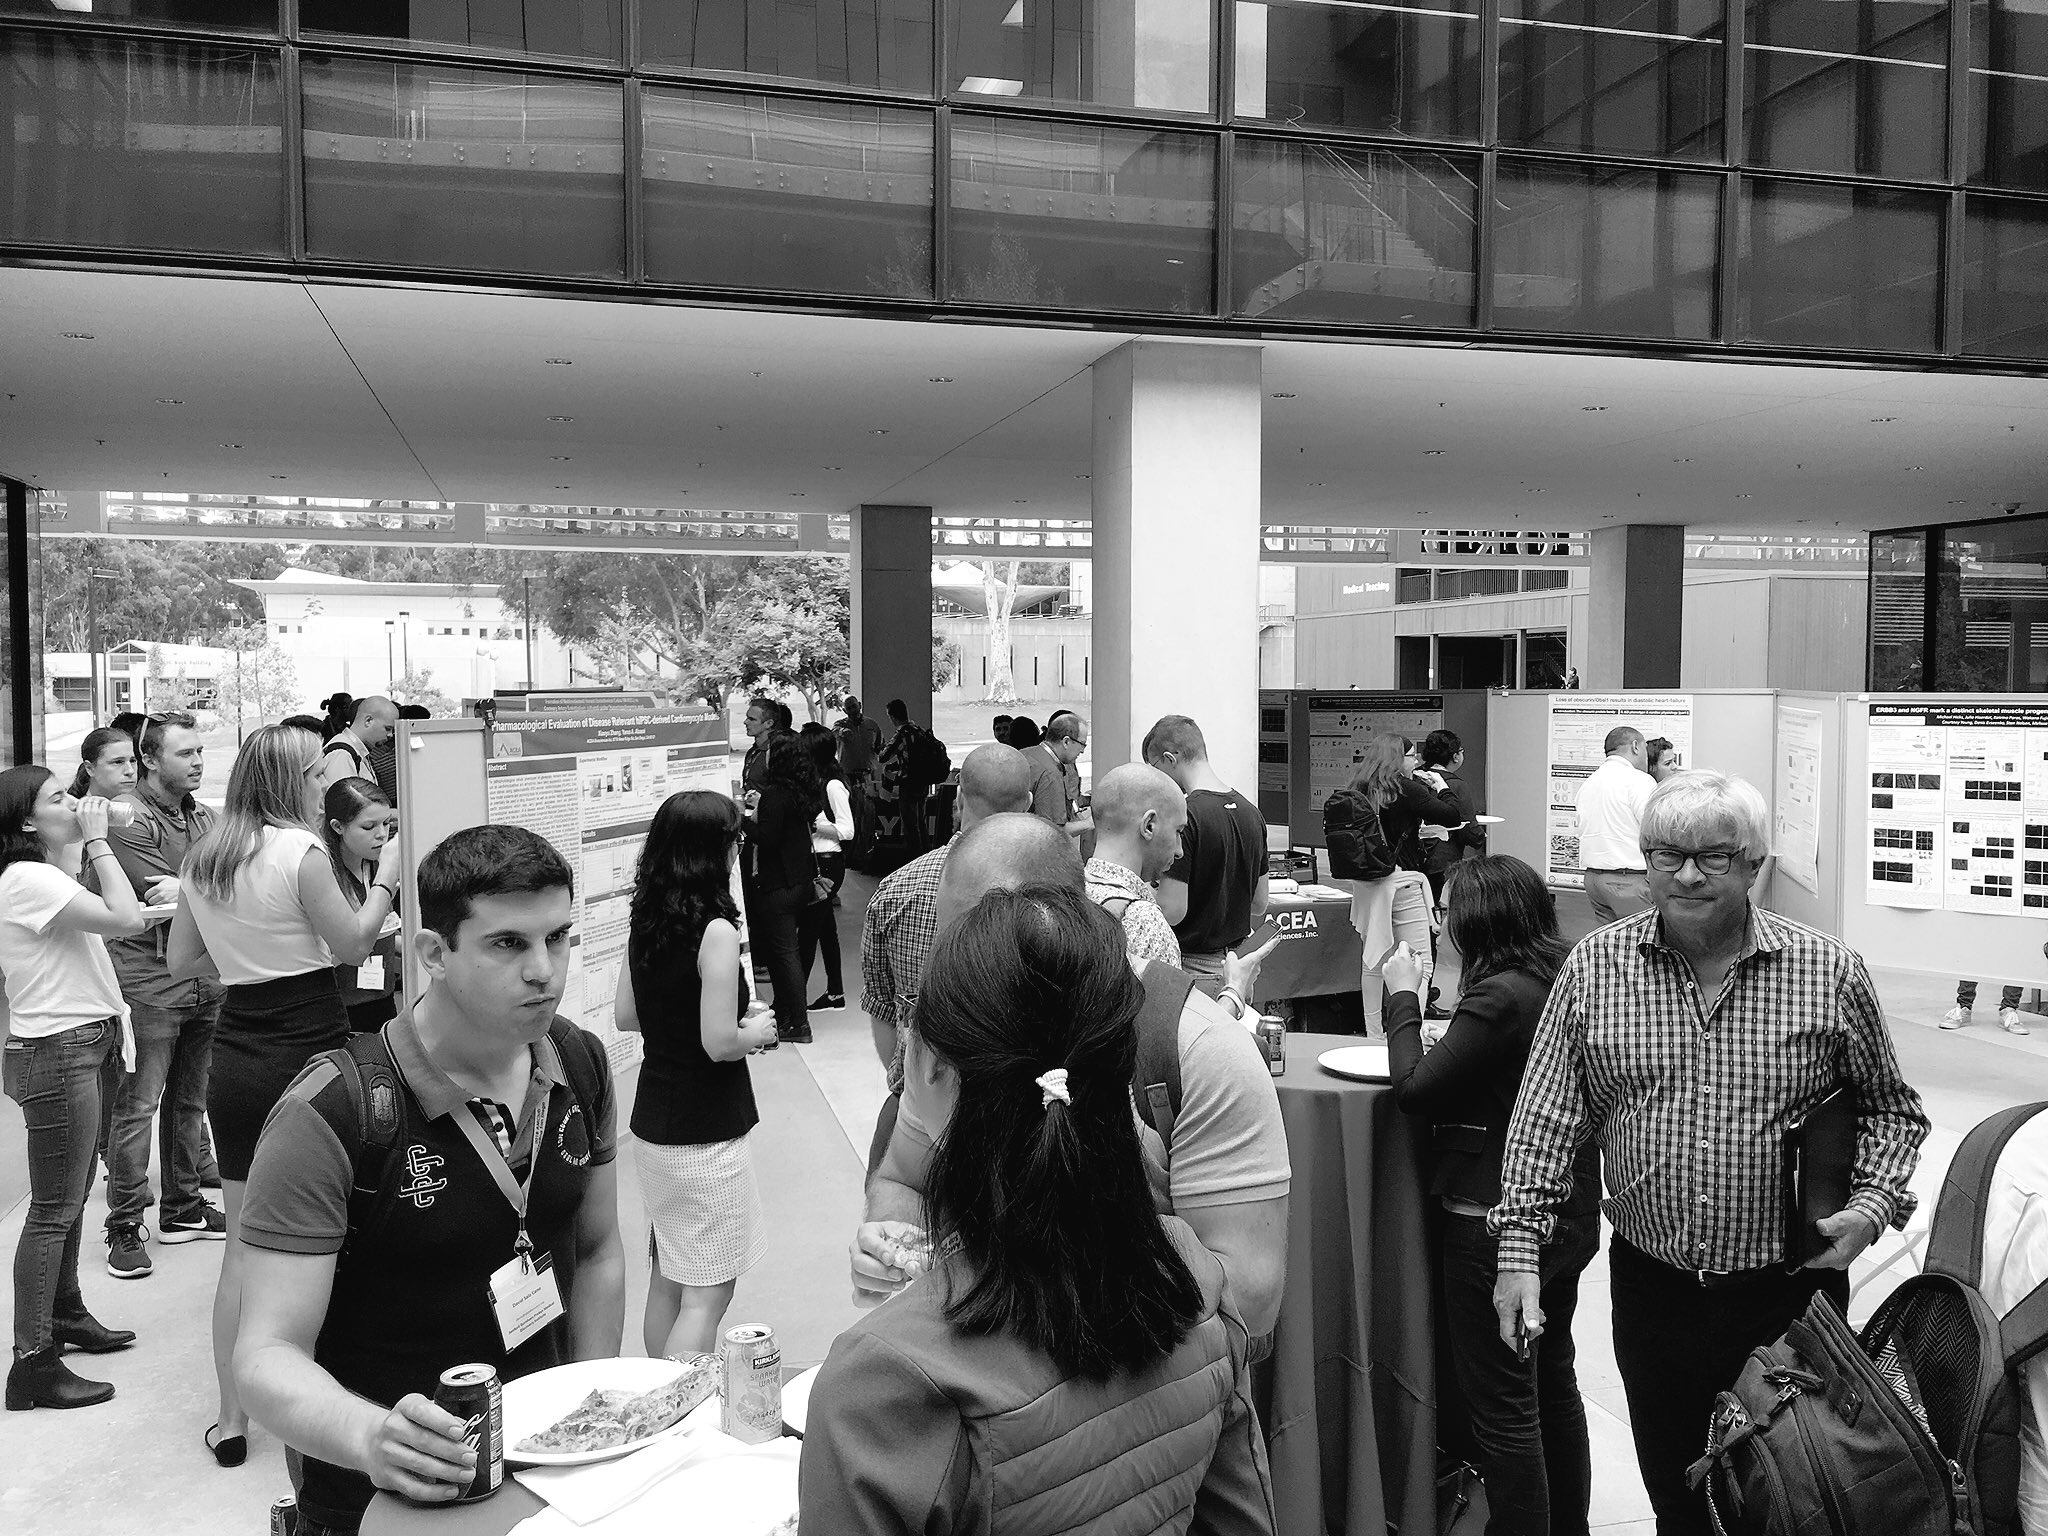 Poster Session at the 2018 meeting